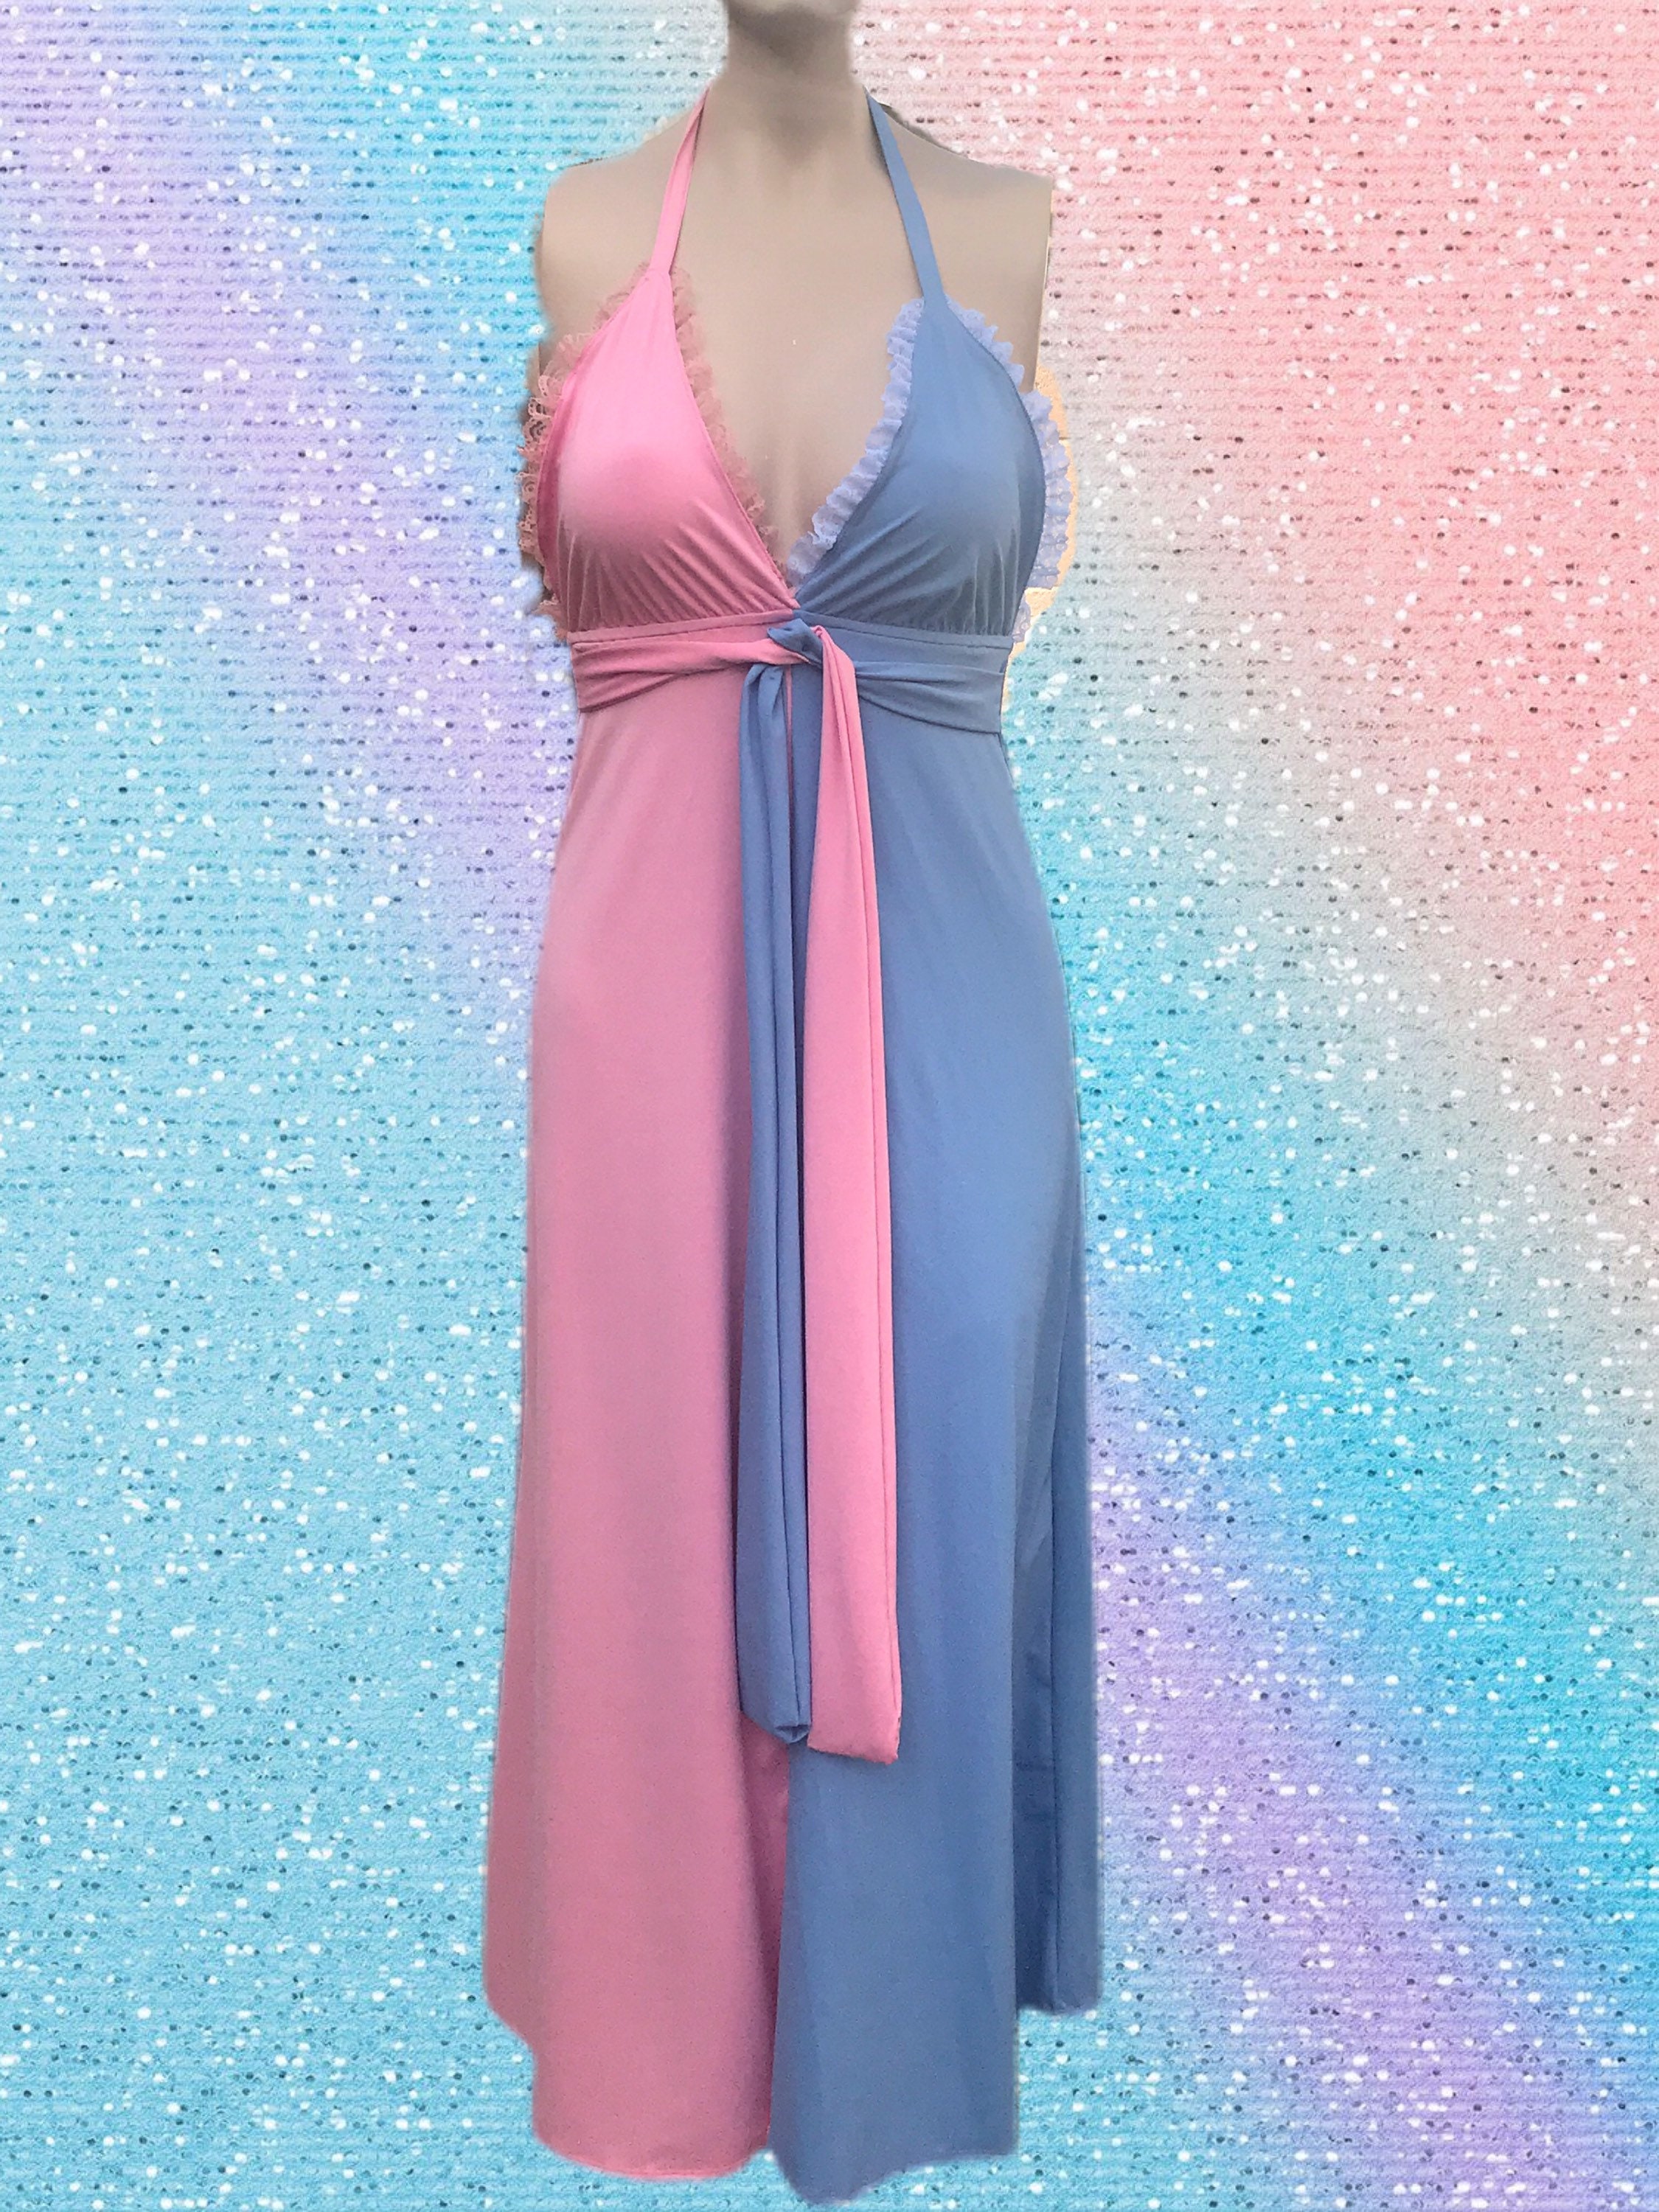 pink and blue dress